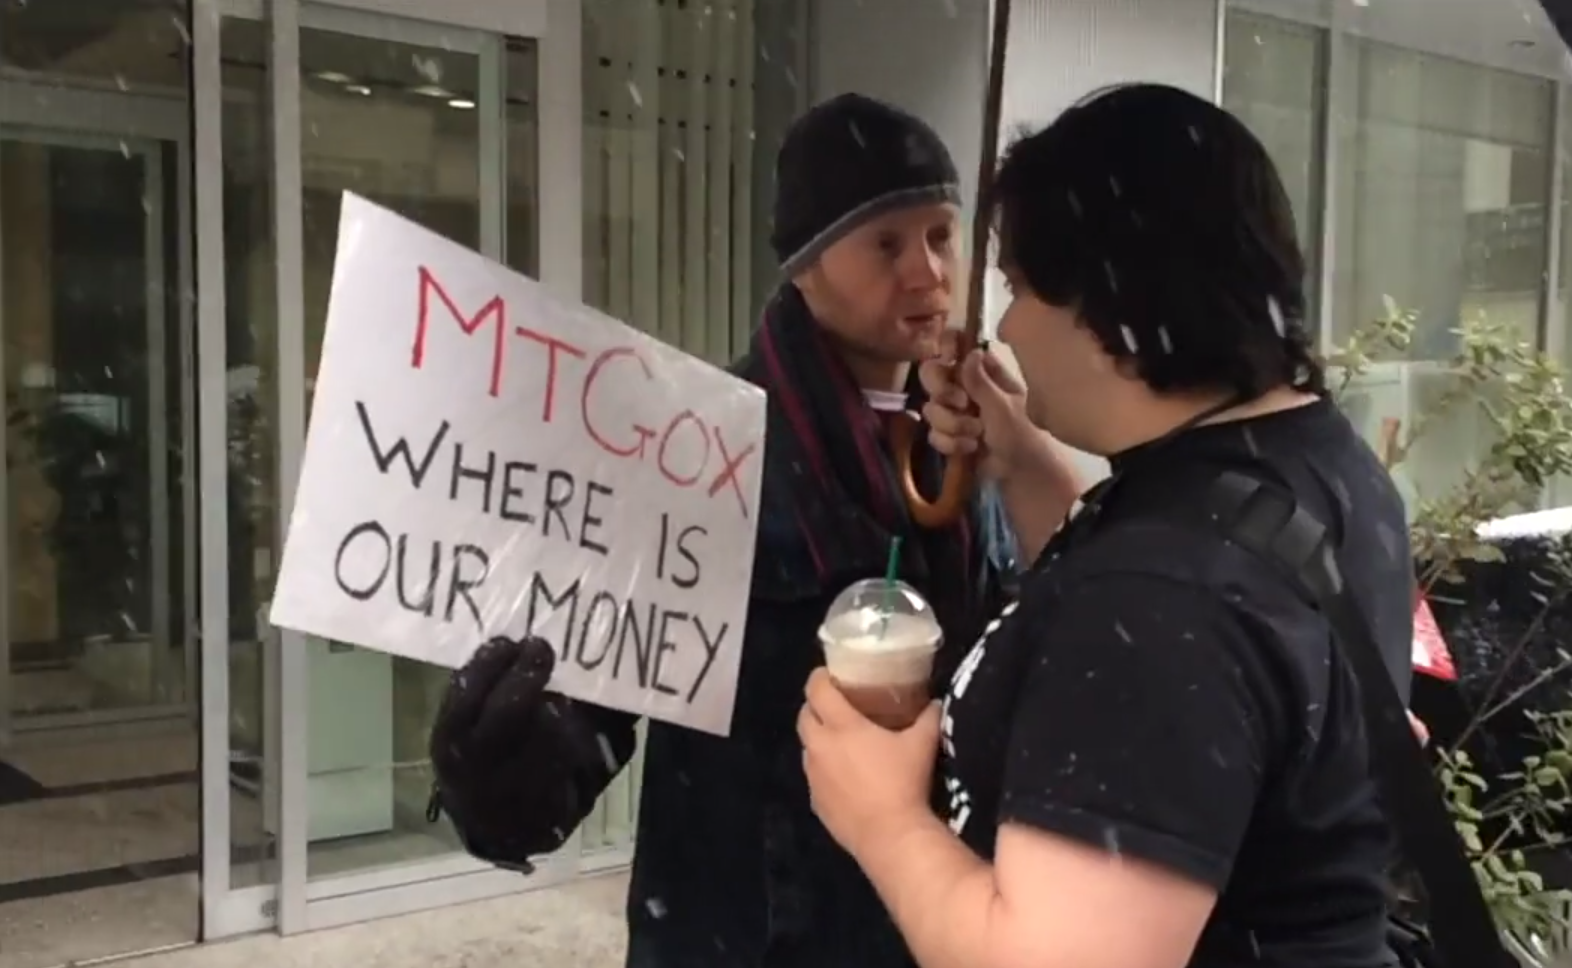 Former Mt. Gox CEO Mark Karpeles To Appeal Data Conviction